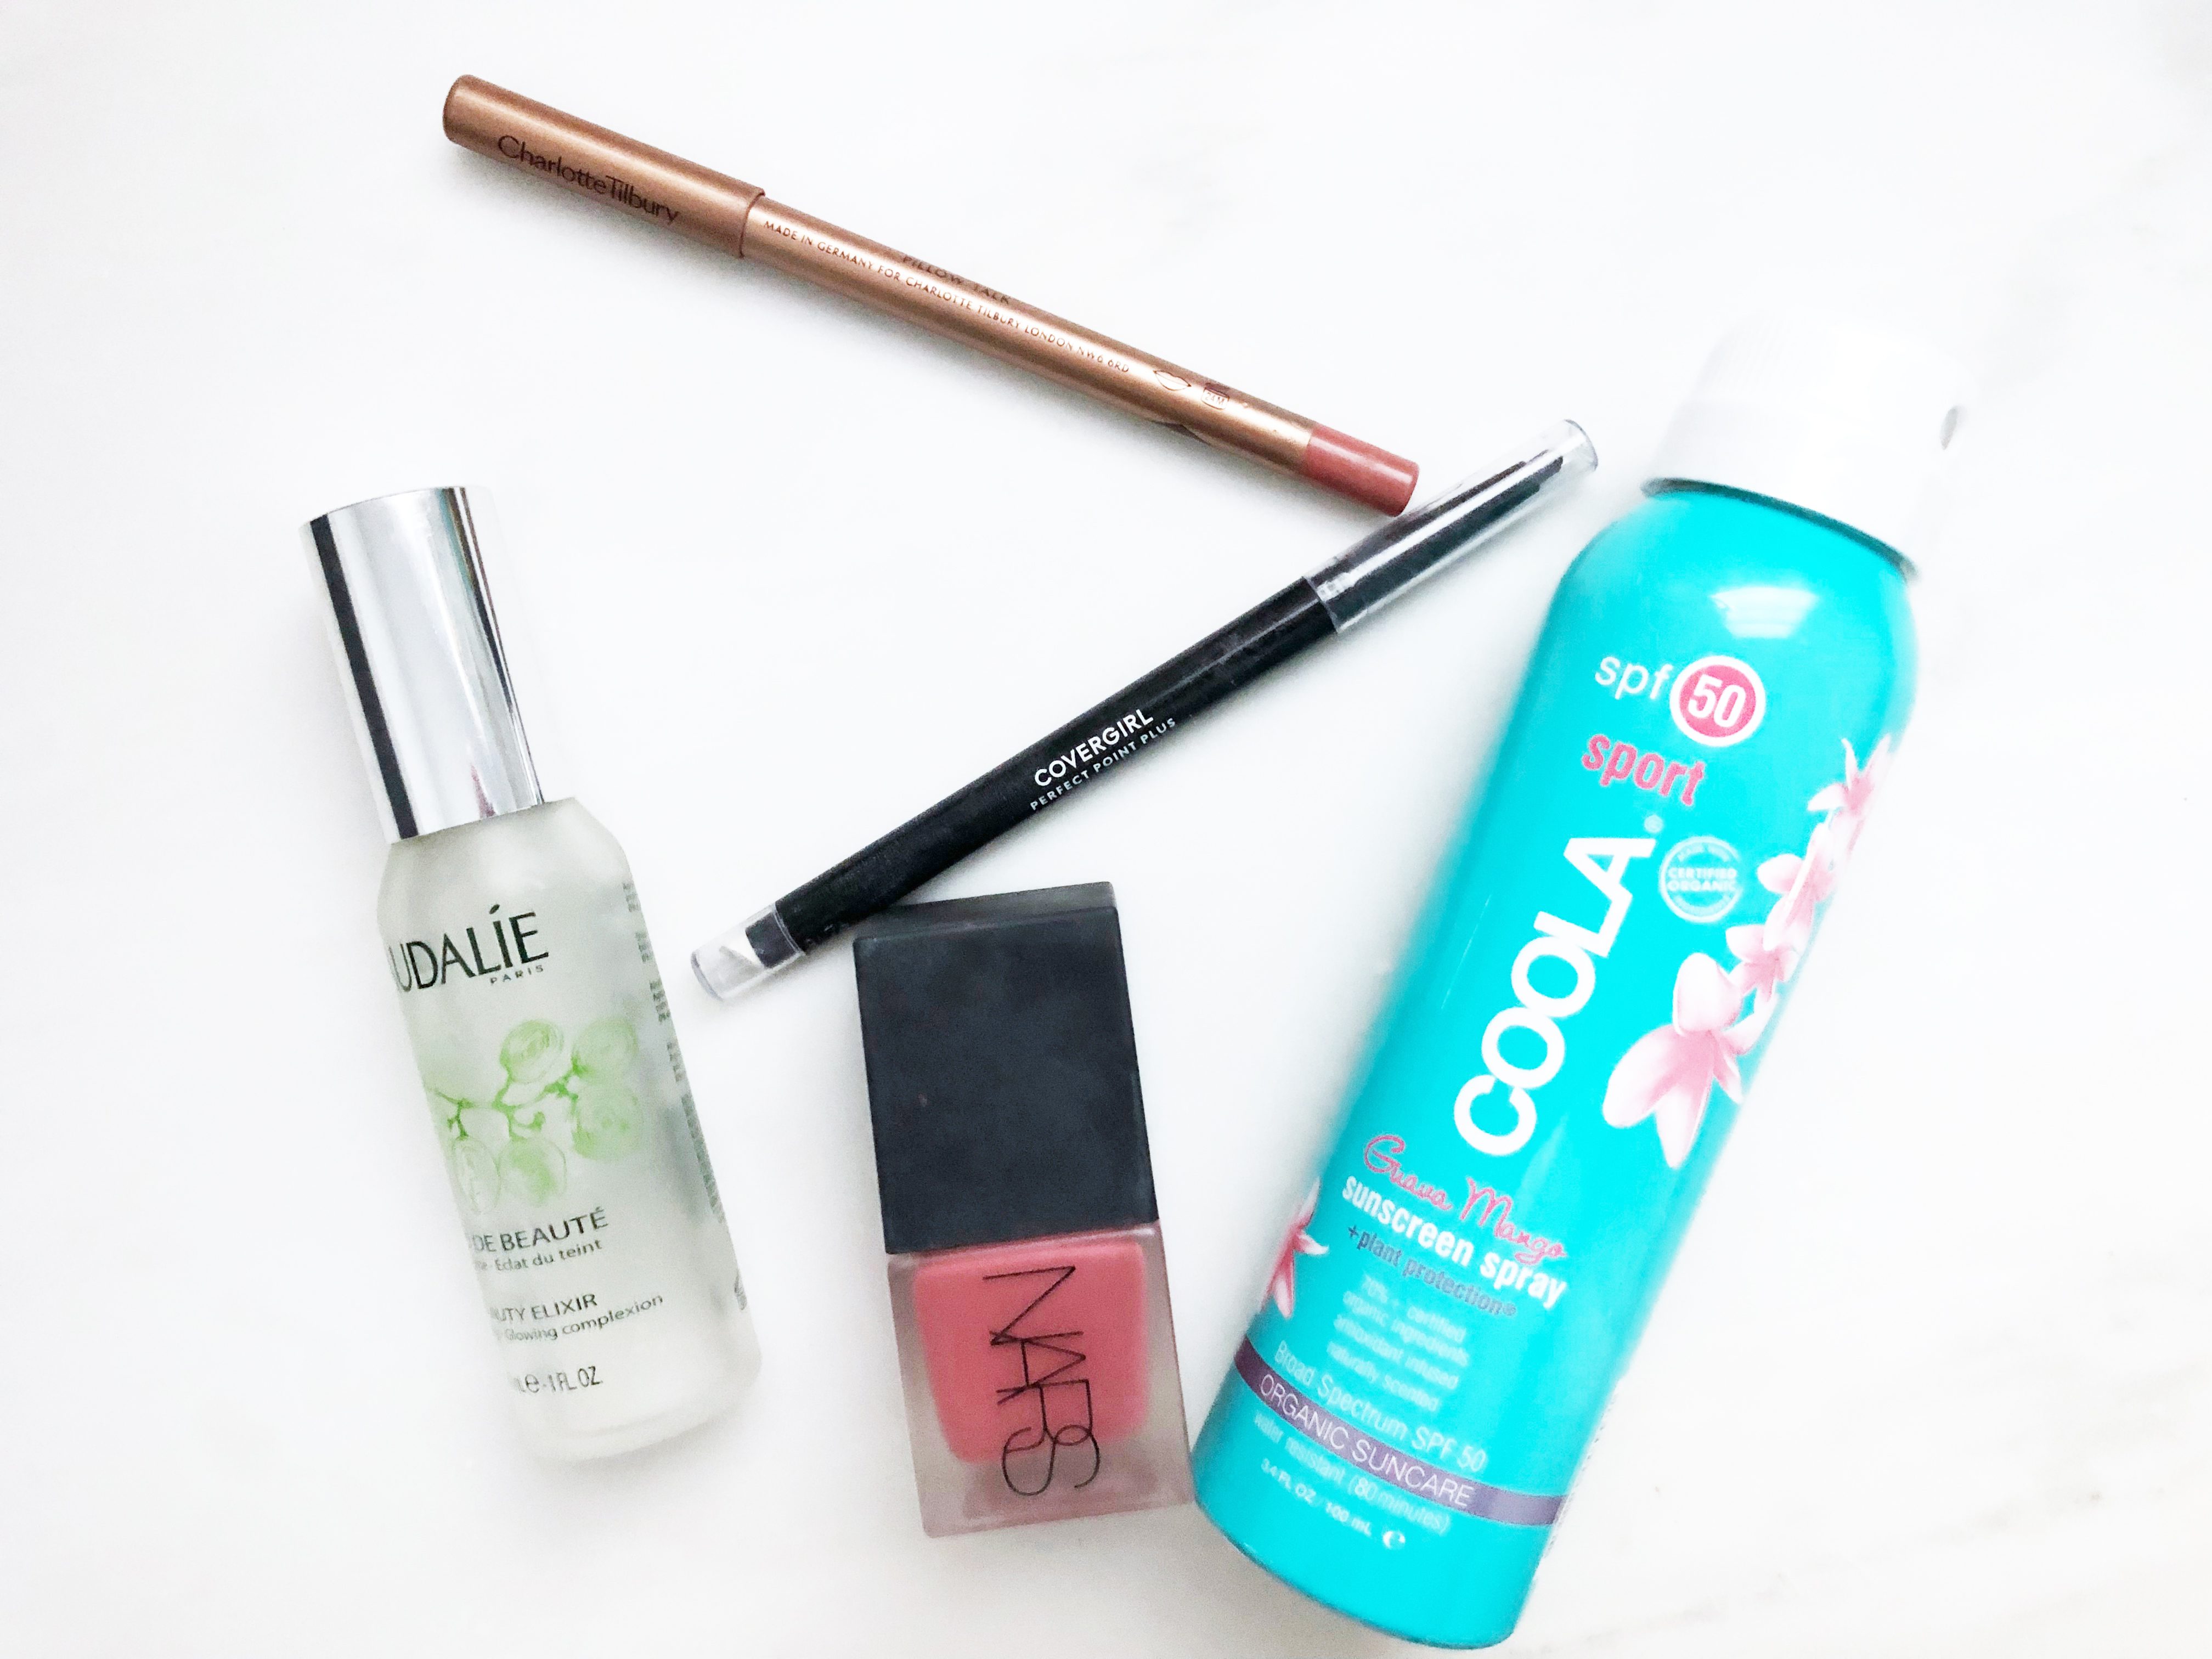 Nicole shares her favorite beauty products on Simply Stine. A mix of drugstore and high-end beauty products!